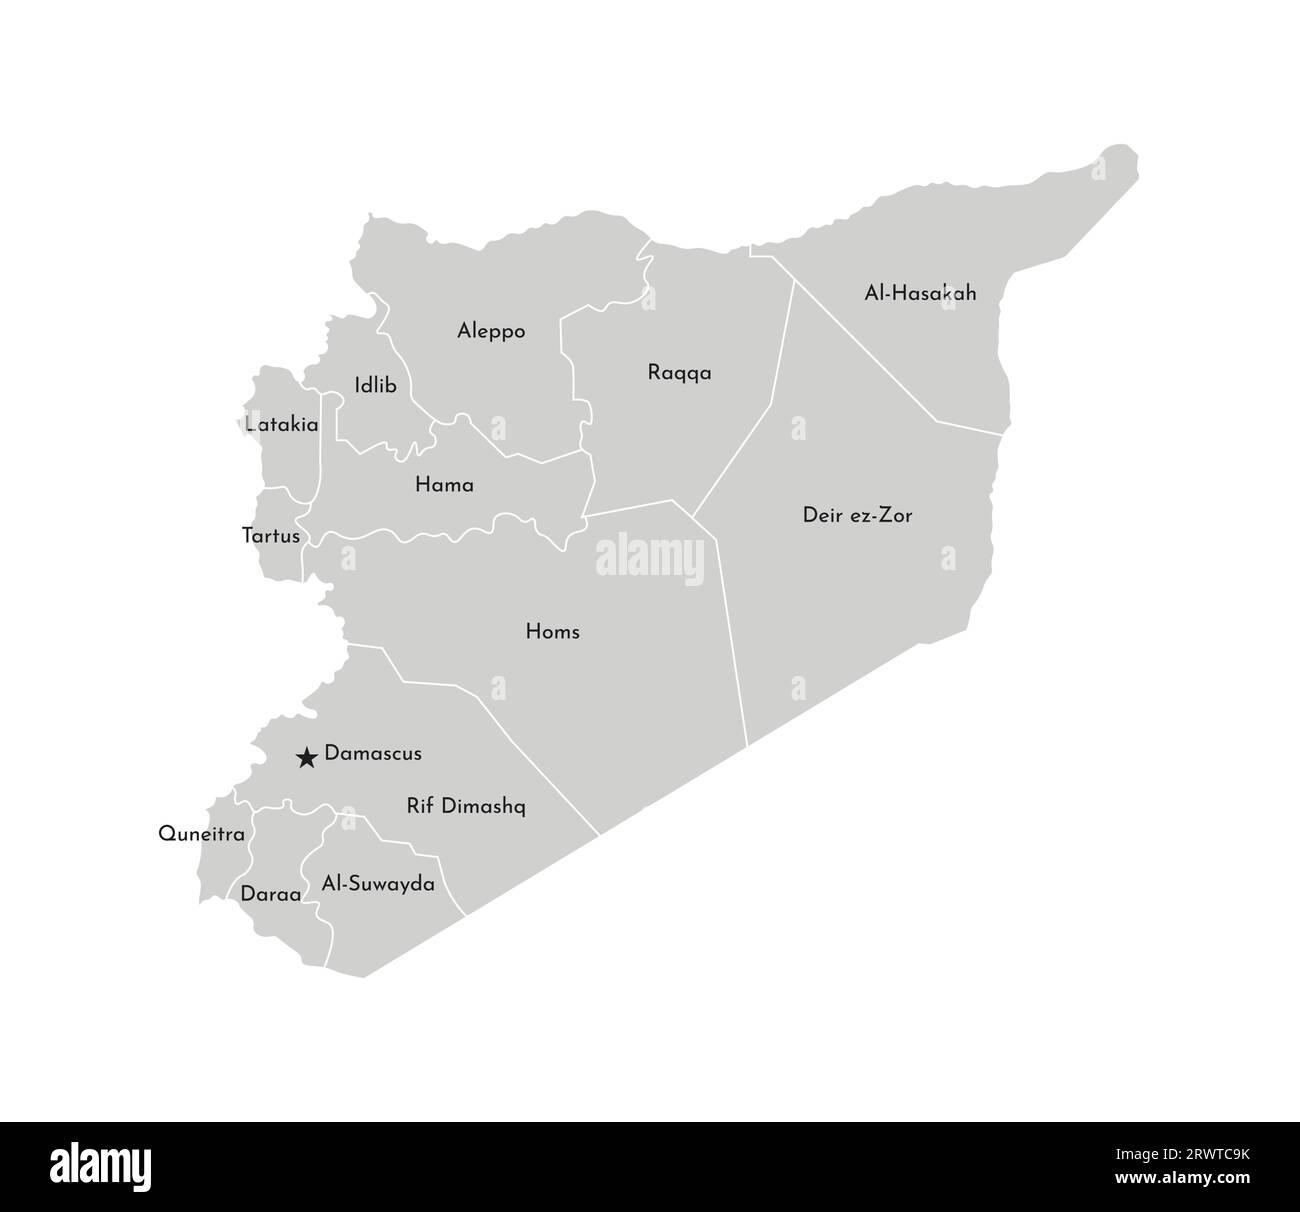 Vector isolated illustration of simplified administrative map of Syria. Borders and names of the provinces (regions). Grey silhouettes. White outline. Stock Vector